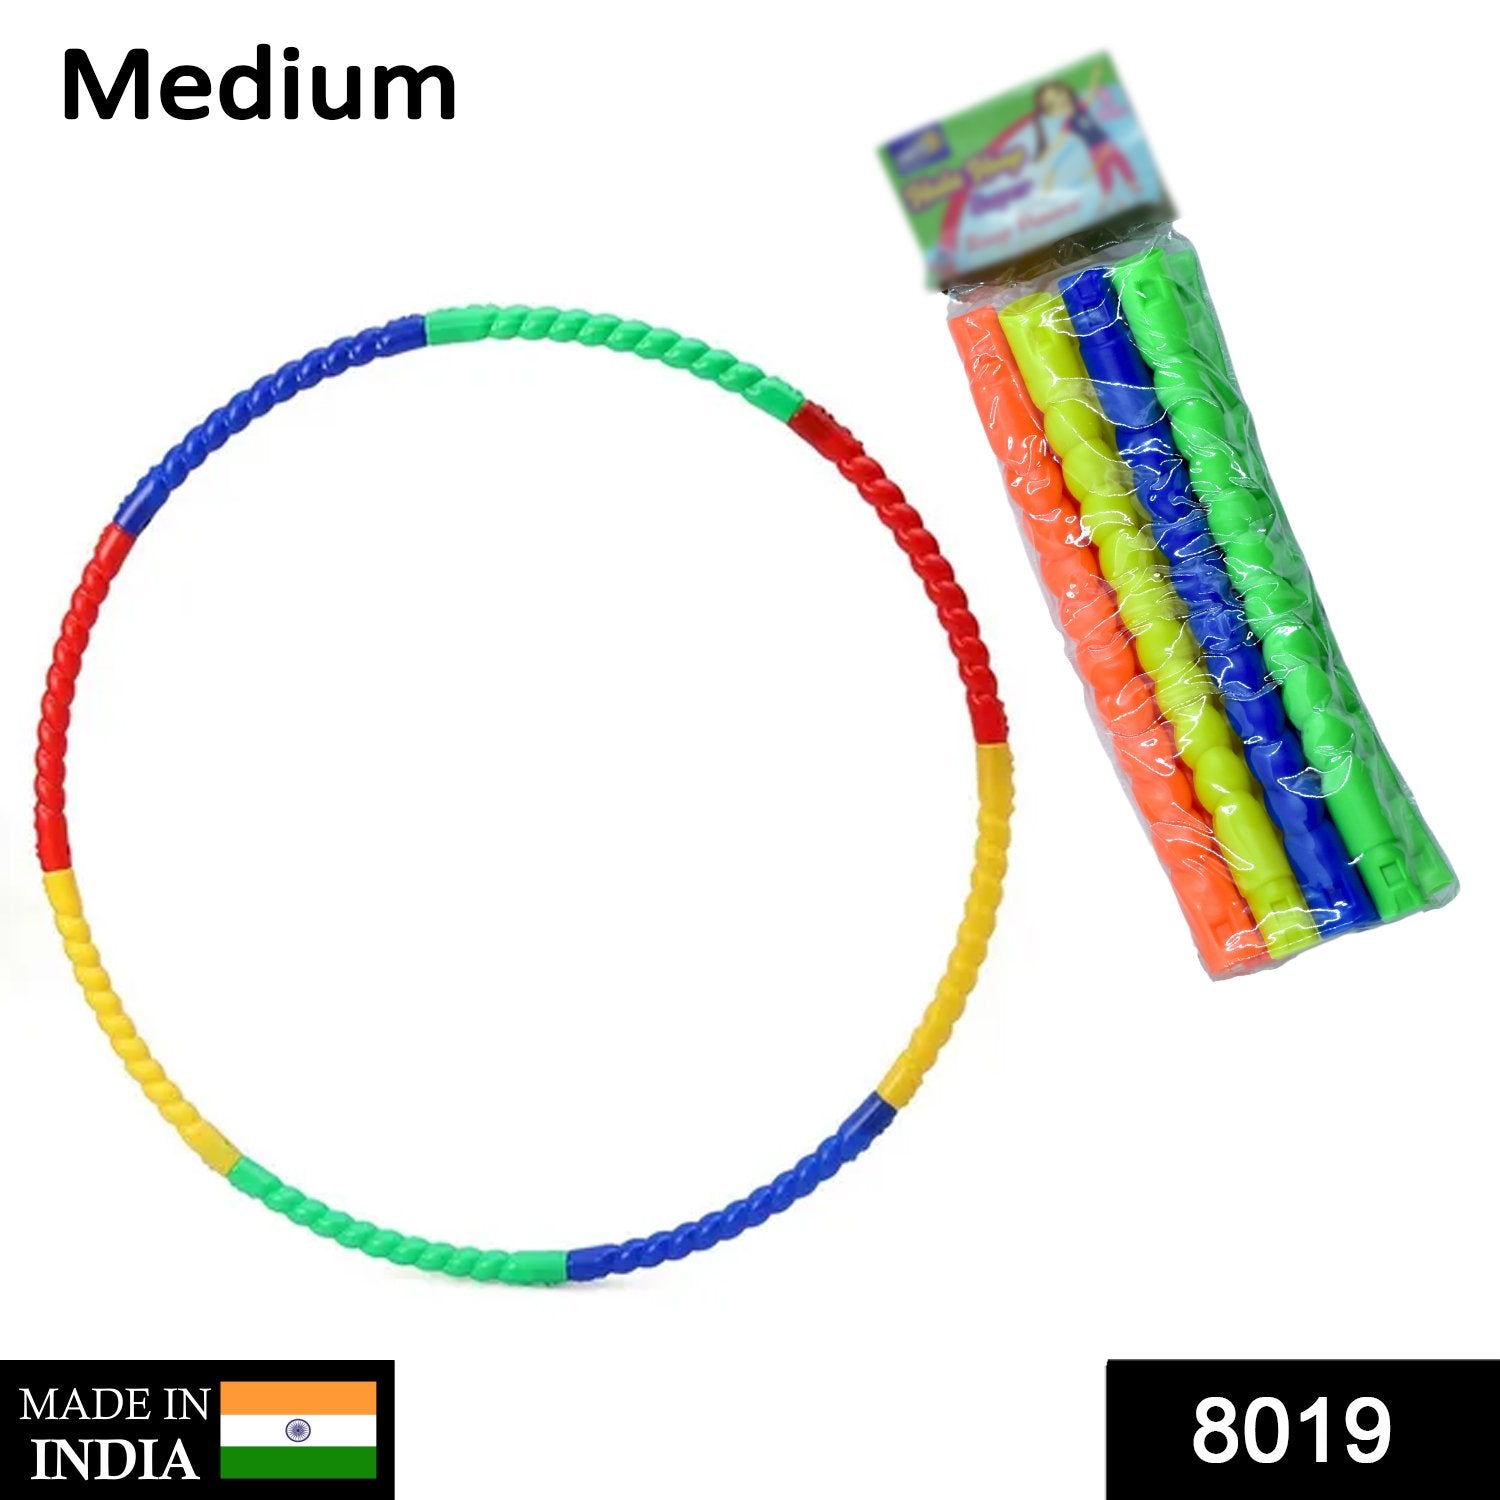 8019 Hoops Hula Interlocking Exercise Ring for Fitness with Dia Meter Boys Girls and Adults